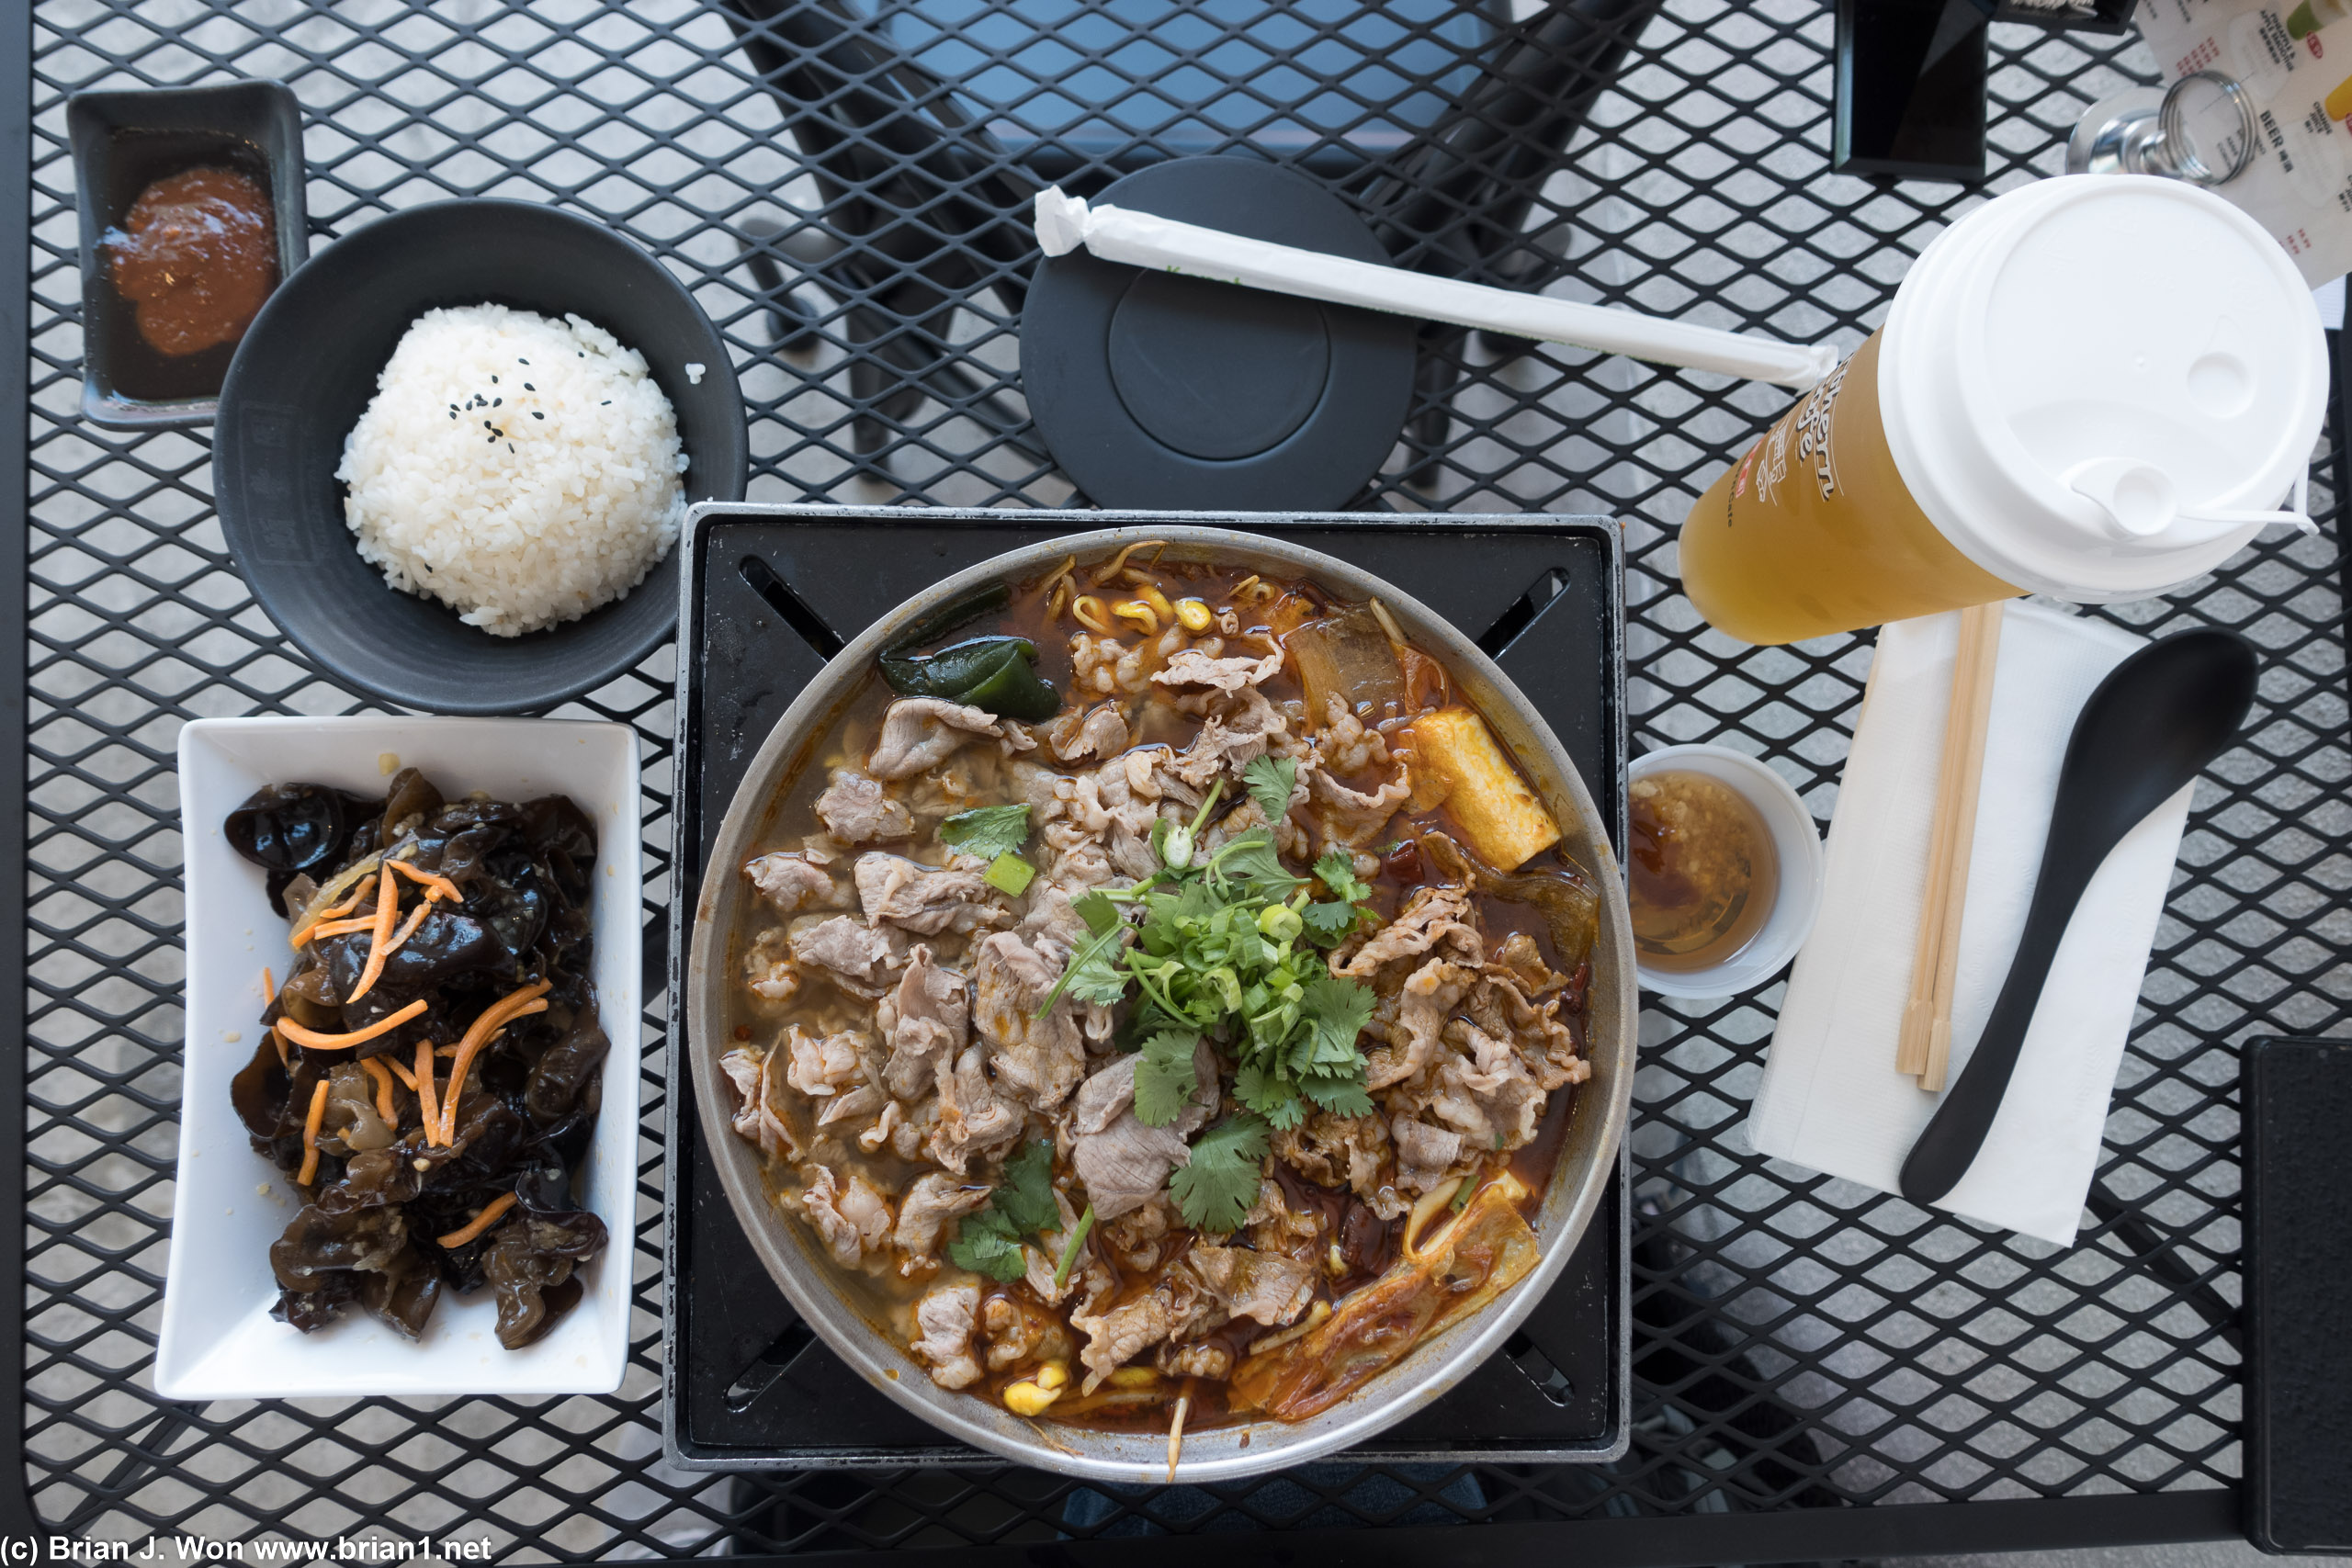 Lunch combo deals offer $3 off if you get drink and cold side dish with your hot pot.